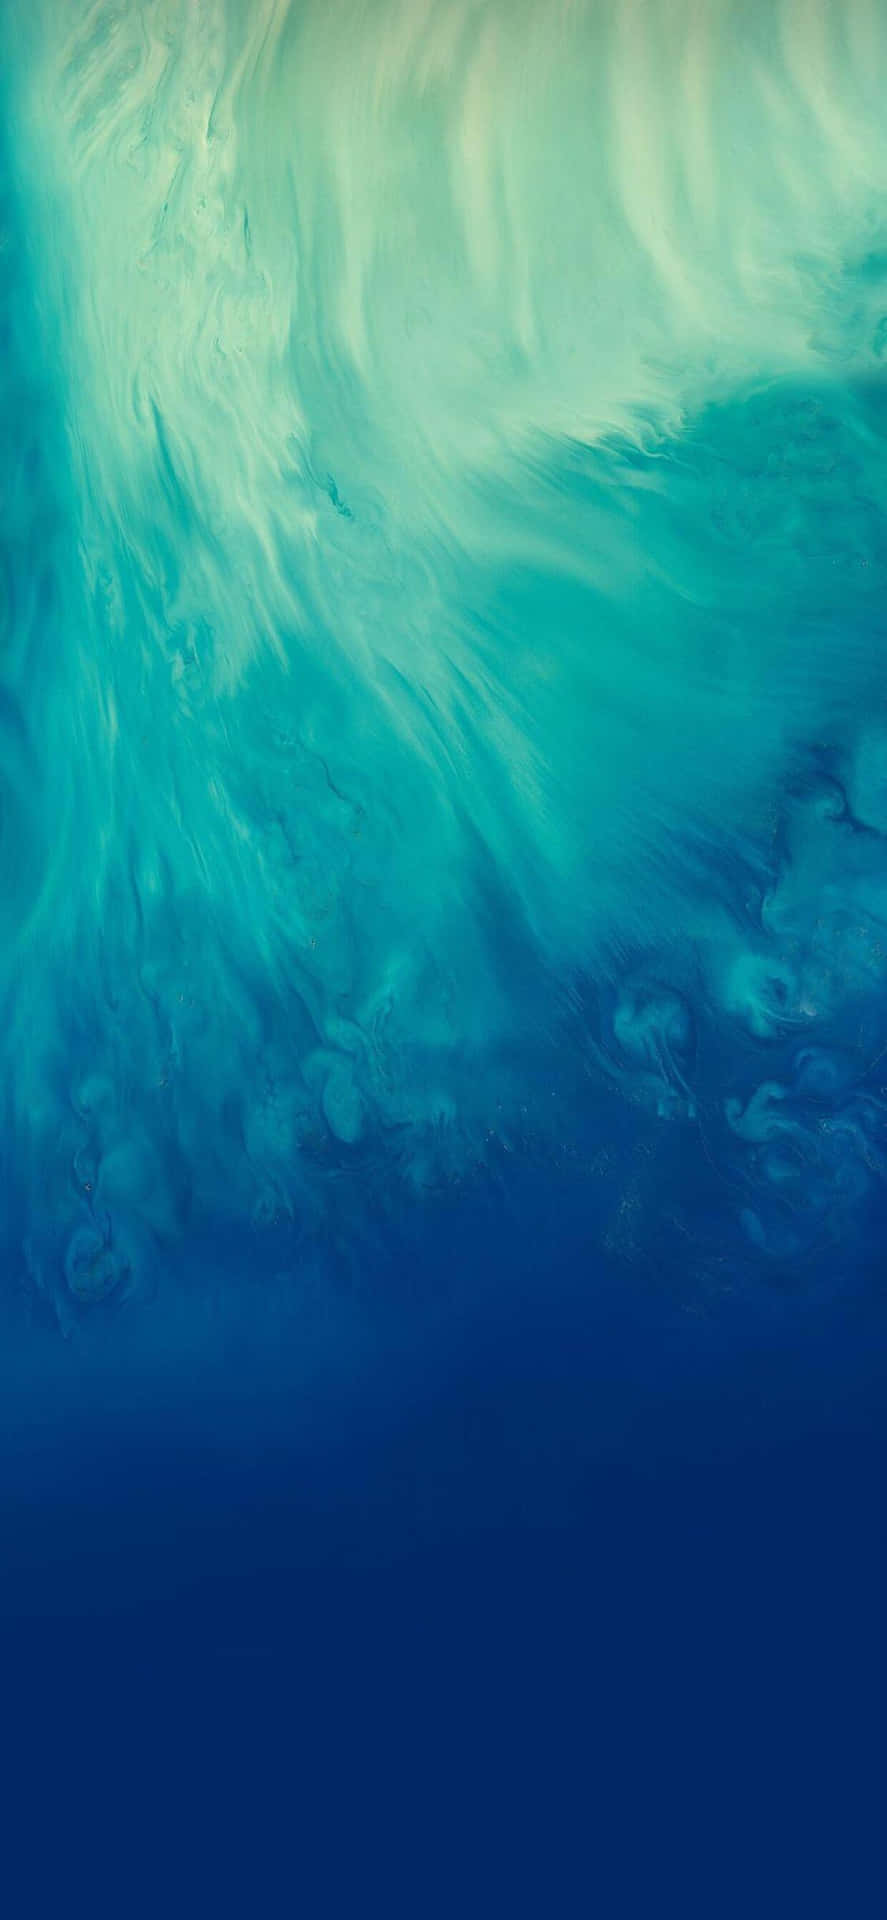 Abstract Aqua Waves Texture Background